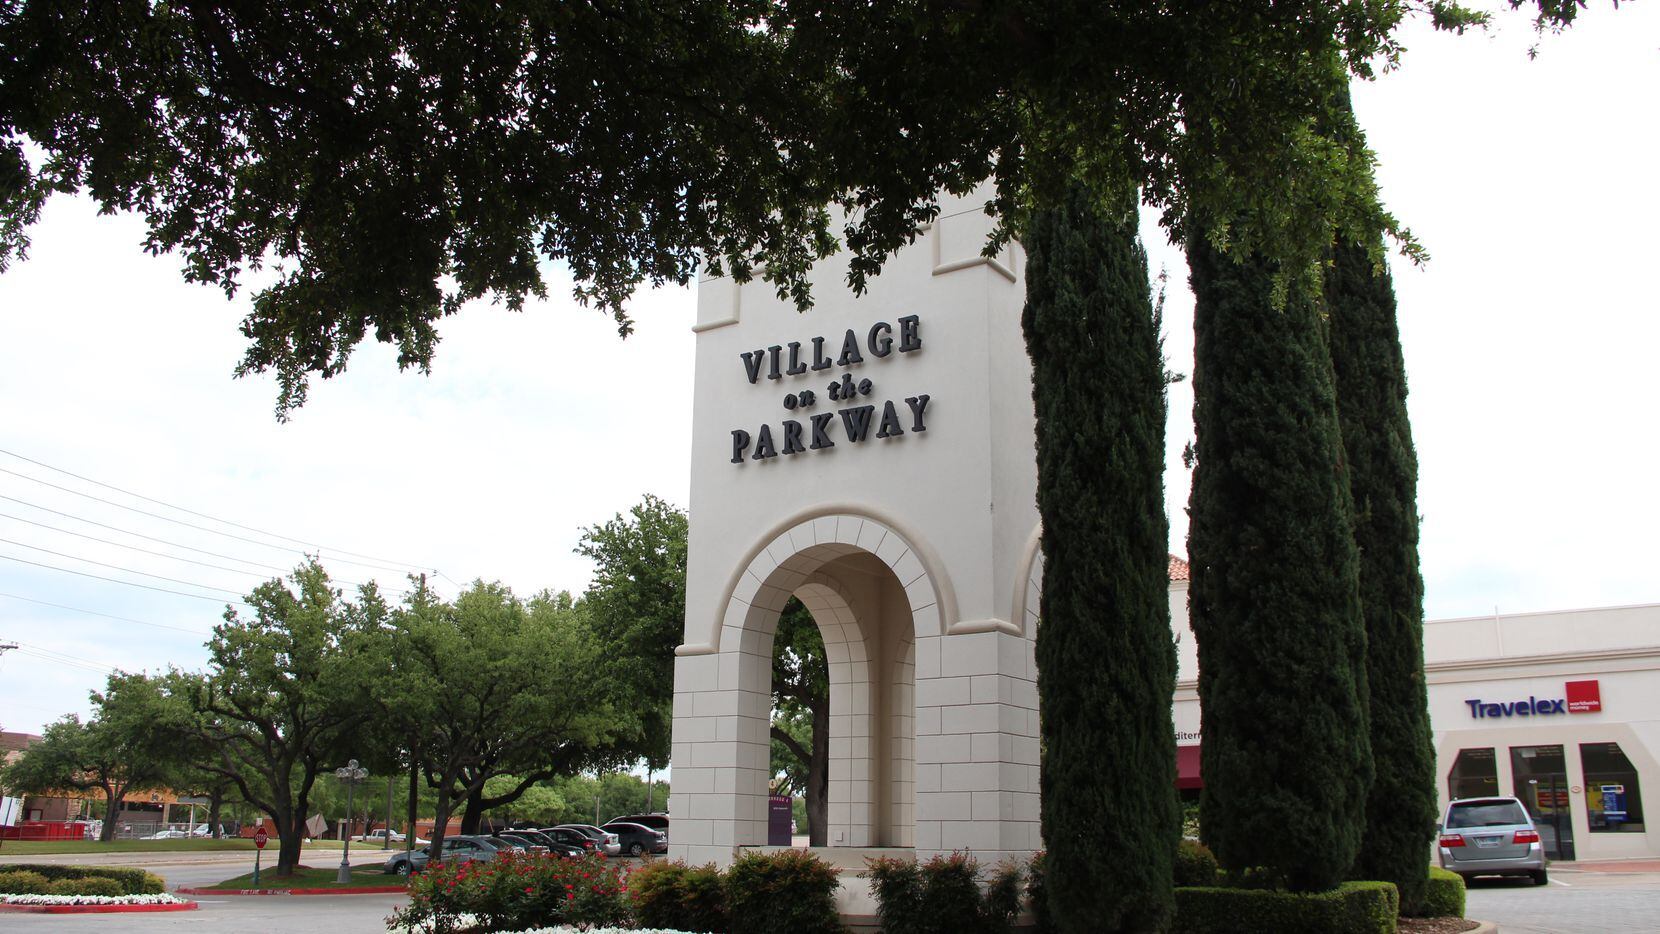 Village on the Parkway is at the Dallas North Tollway and Belt Line Road.